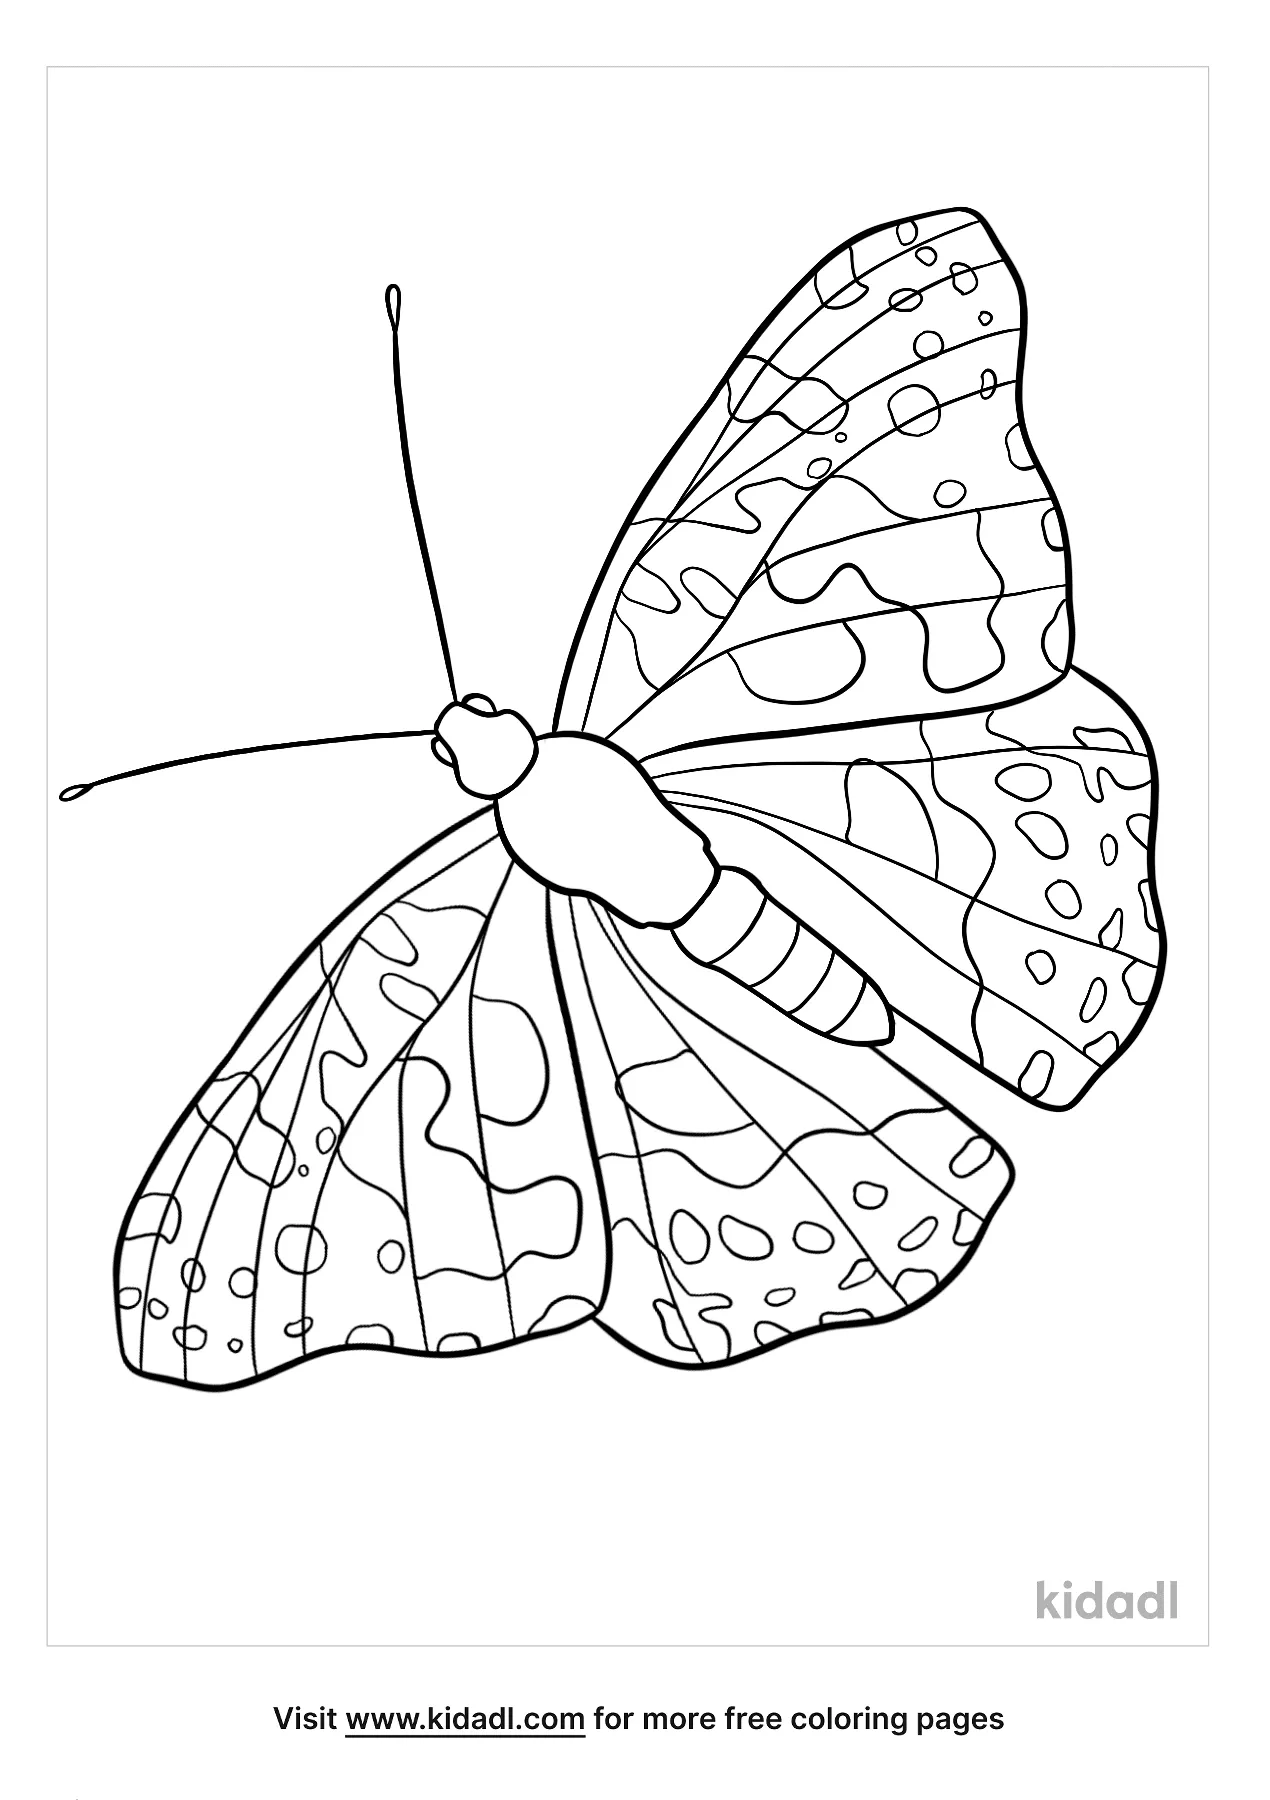 Painted Lady Butterfly Coloring Pages   Free Butterflies Coloring ...